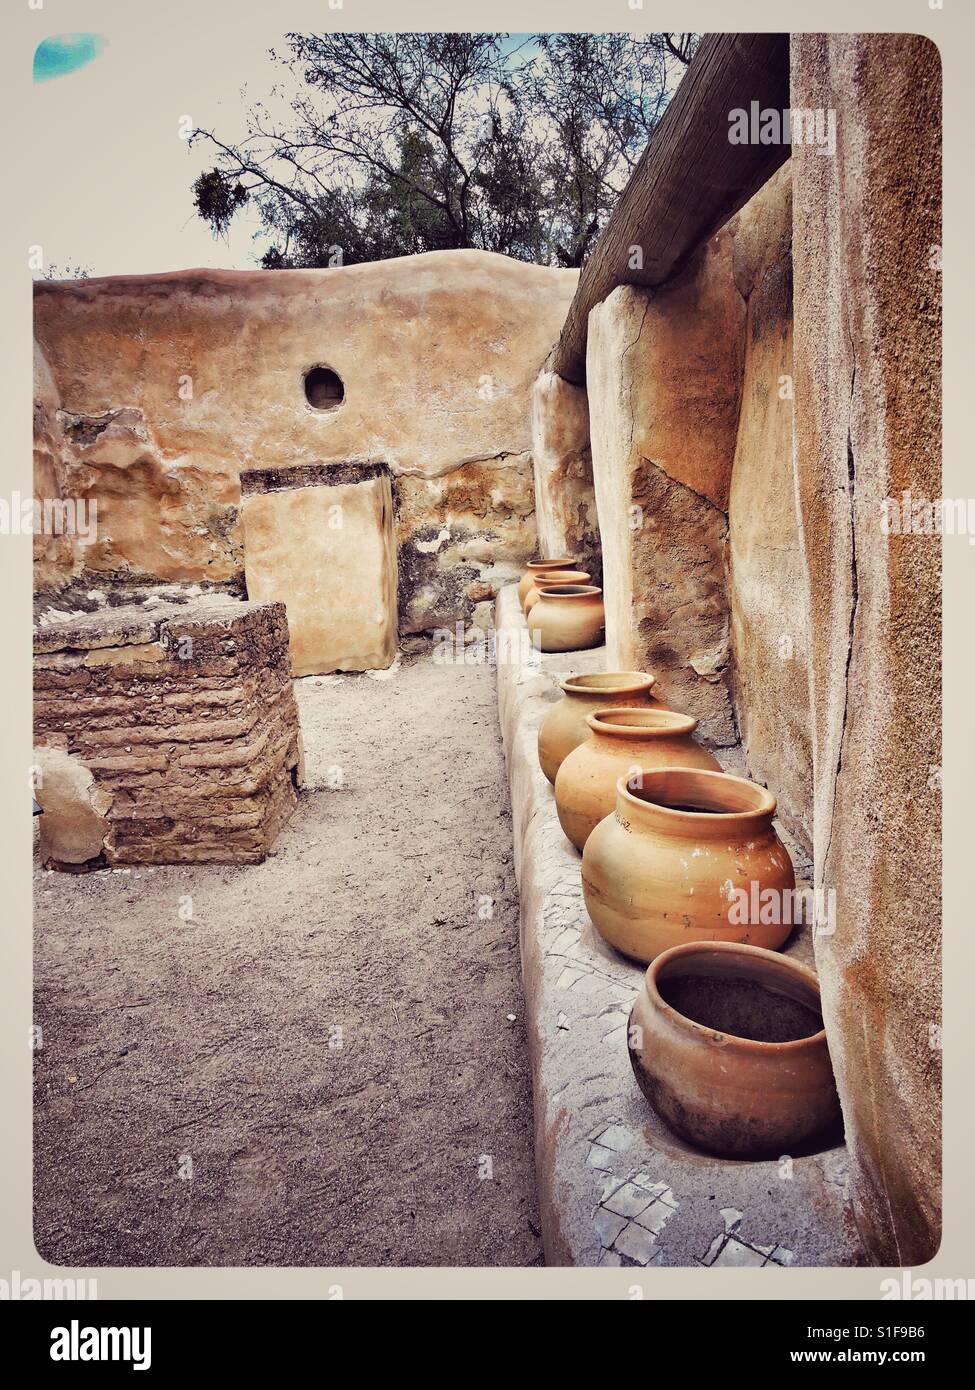 Adobe walls and Indian pottery Stock Photo